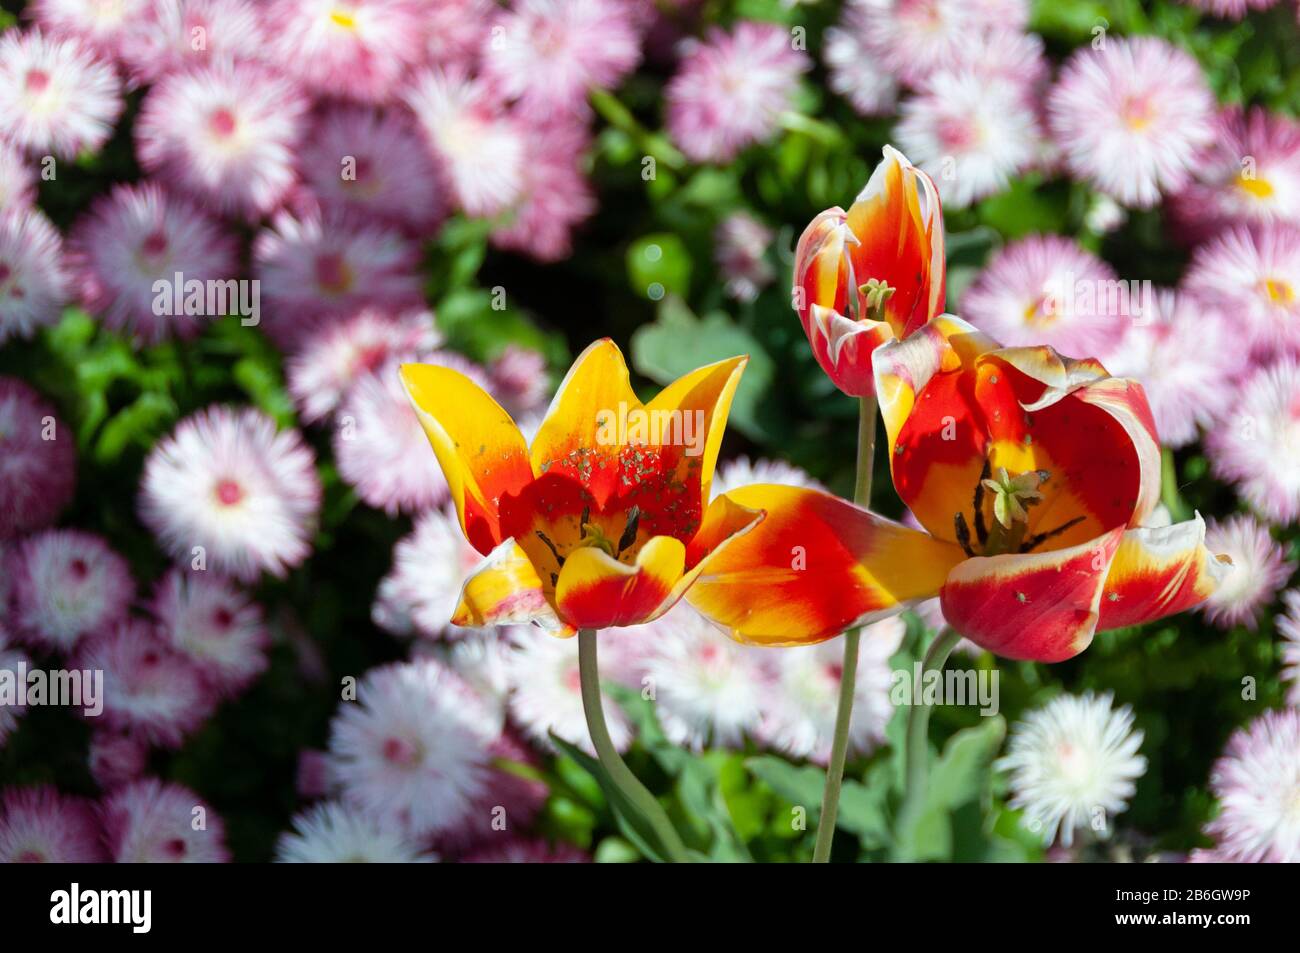 Close up of yellow and orange tulips in bright sunlight, against a background of blurred China Aster Sea Starlet Pink flowers. Stock Photo